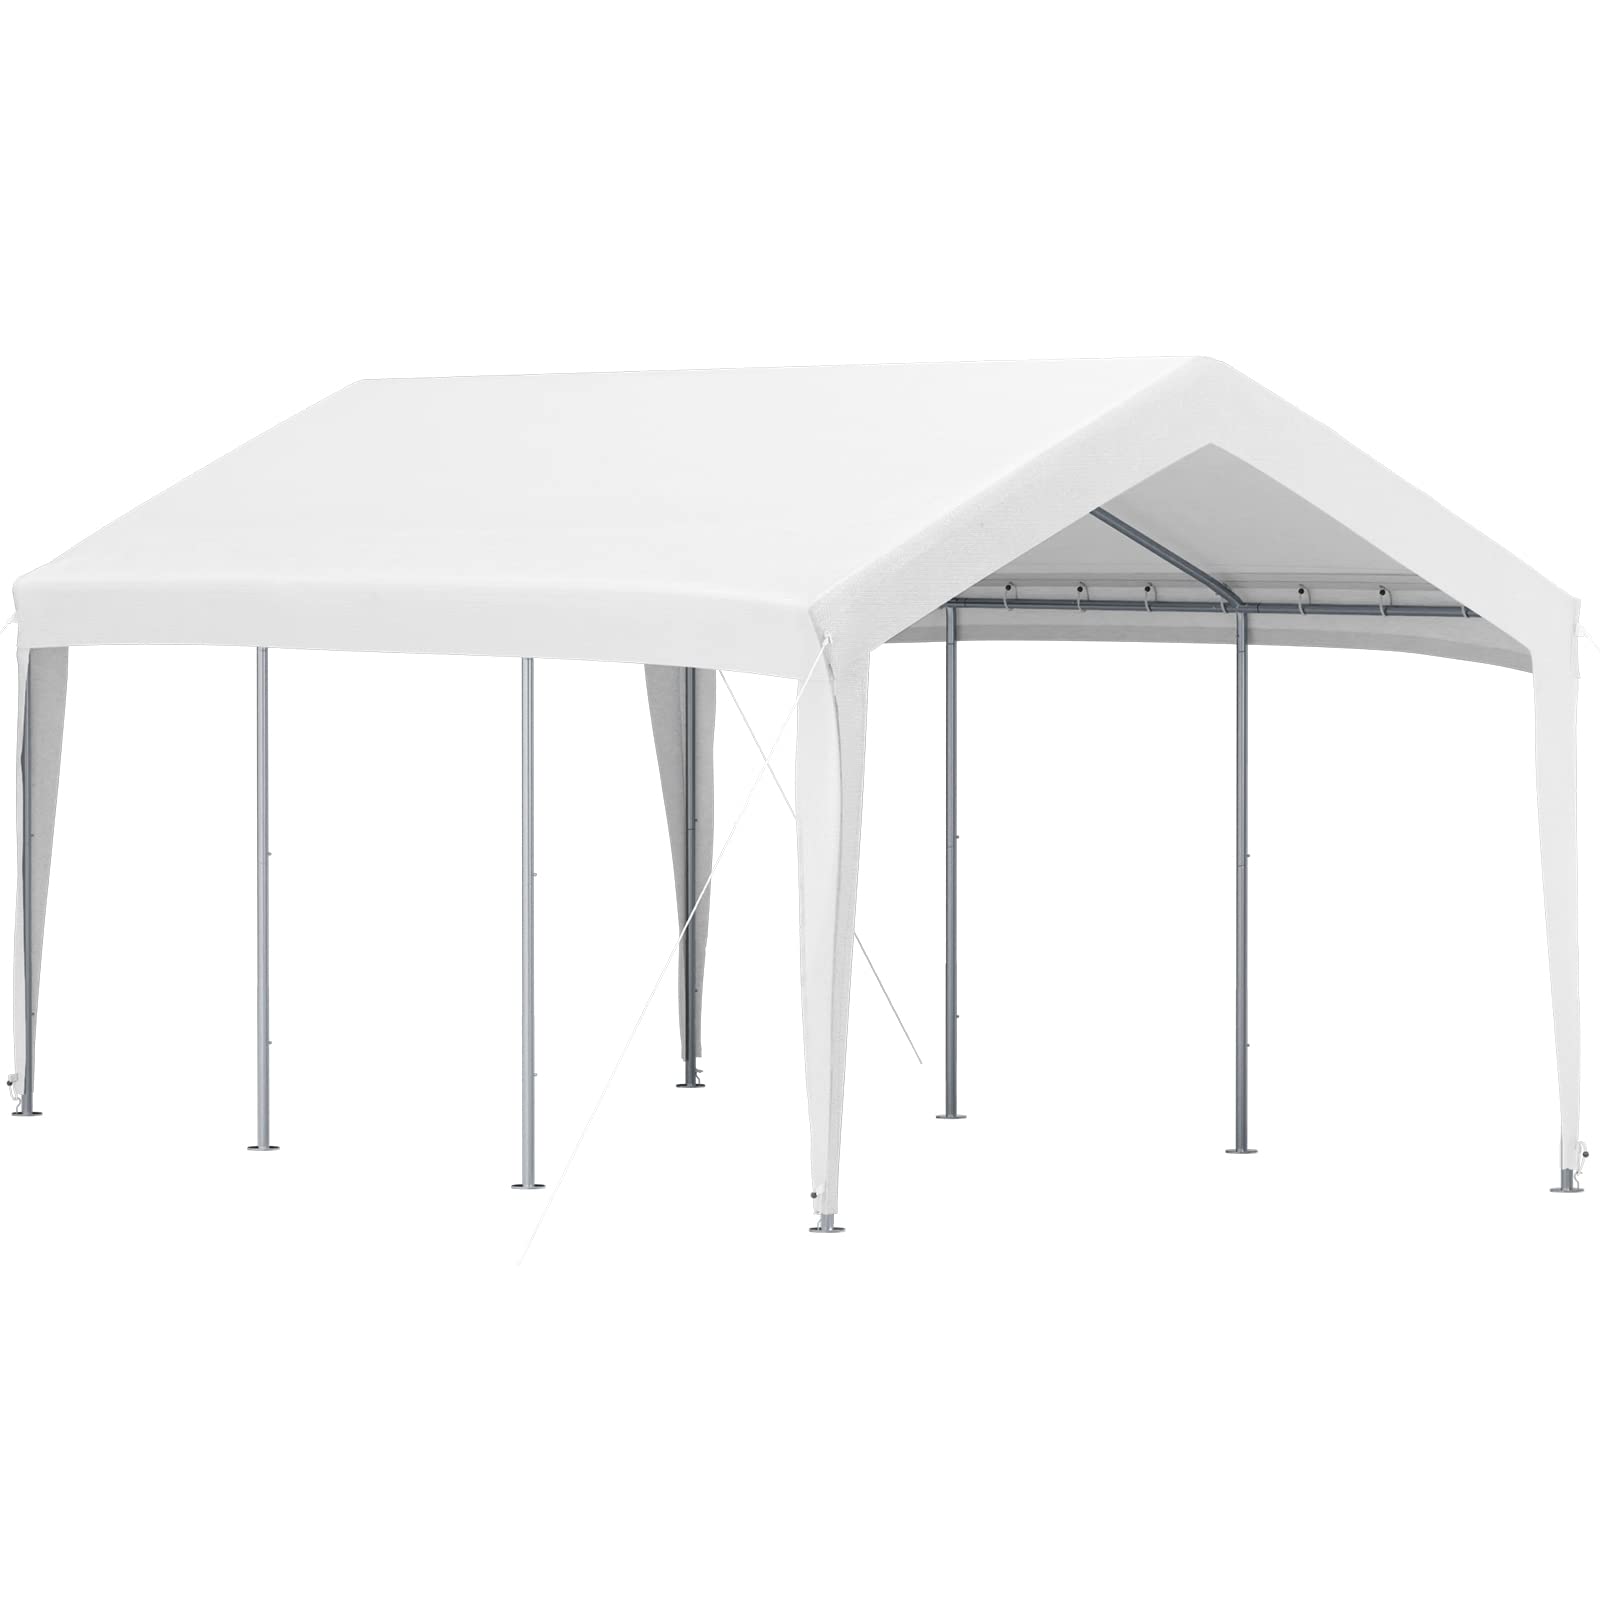 VEVOR 10 x 20 ft Carport Car Canopy, Heavy Duty Garage Shelter with 8 Legs, Car Garage Tent for Outdoor Party, Birthday, Garden, Boats, Adjustable Peak Height from 8.3 ft to 10 ft, White